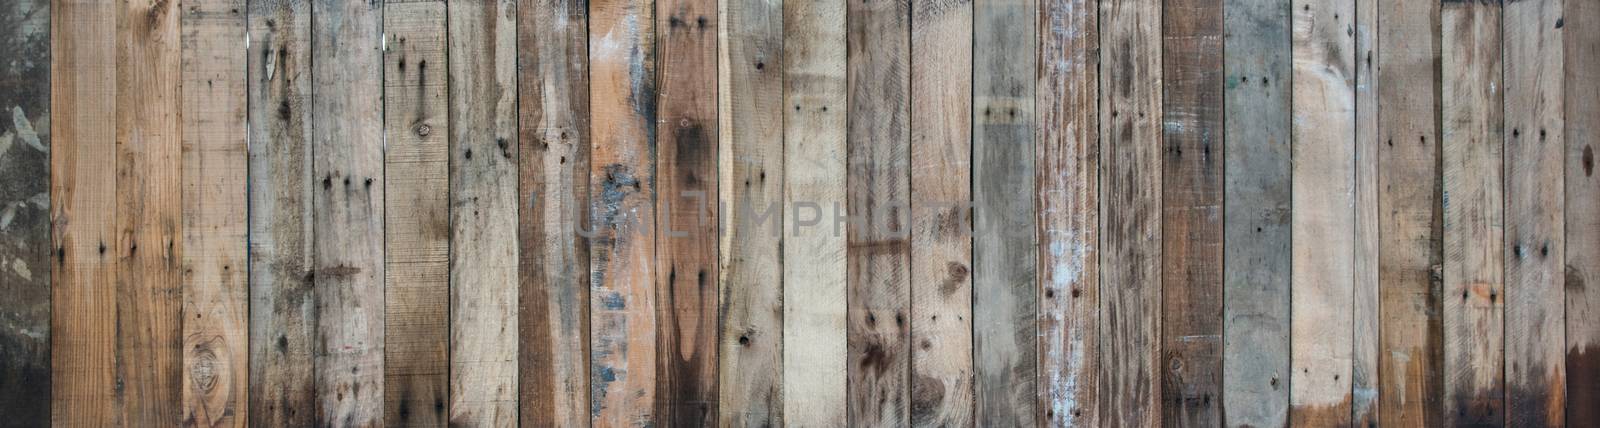 wood brown aged plank texture by antpkr